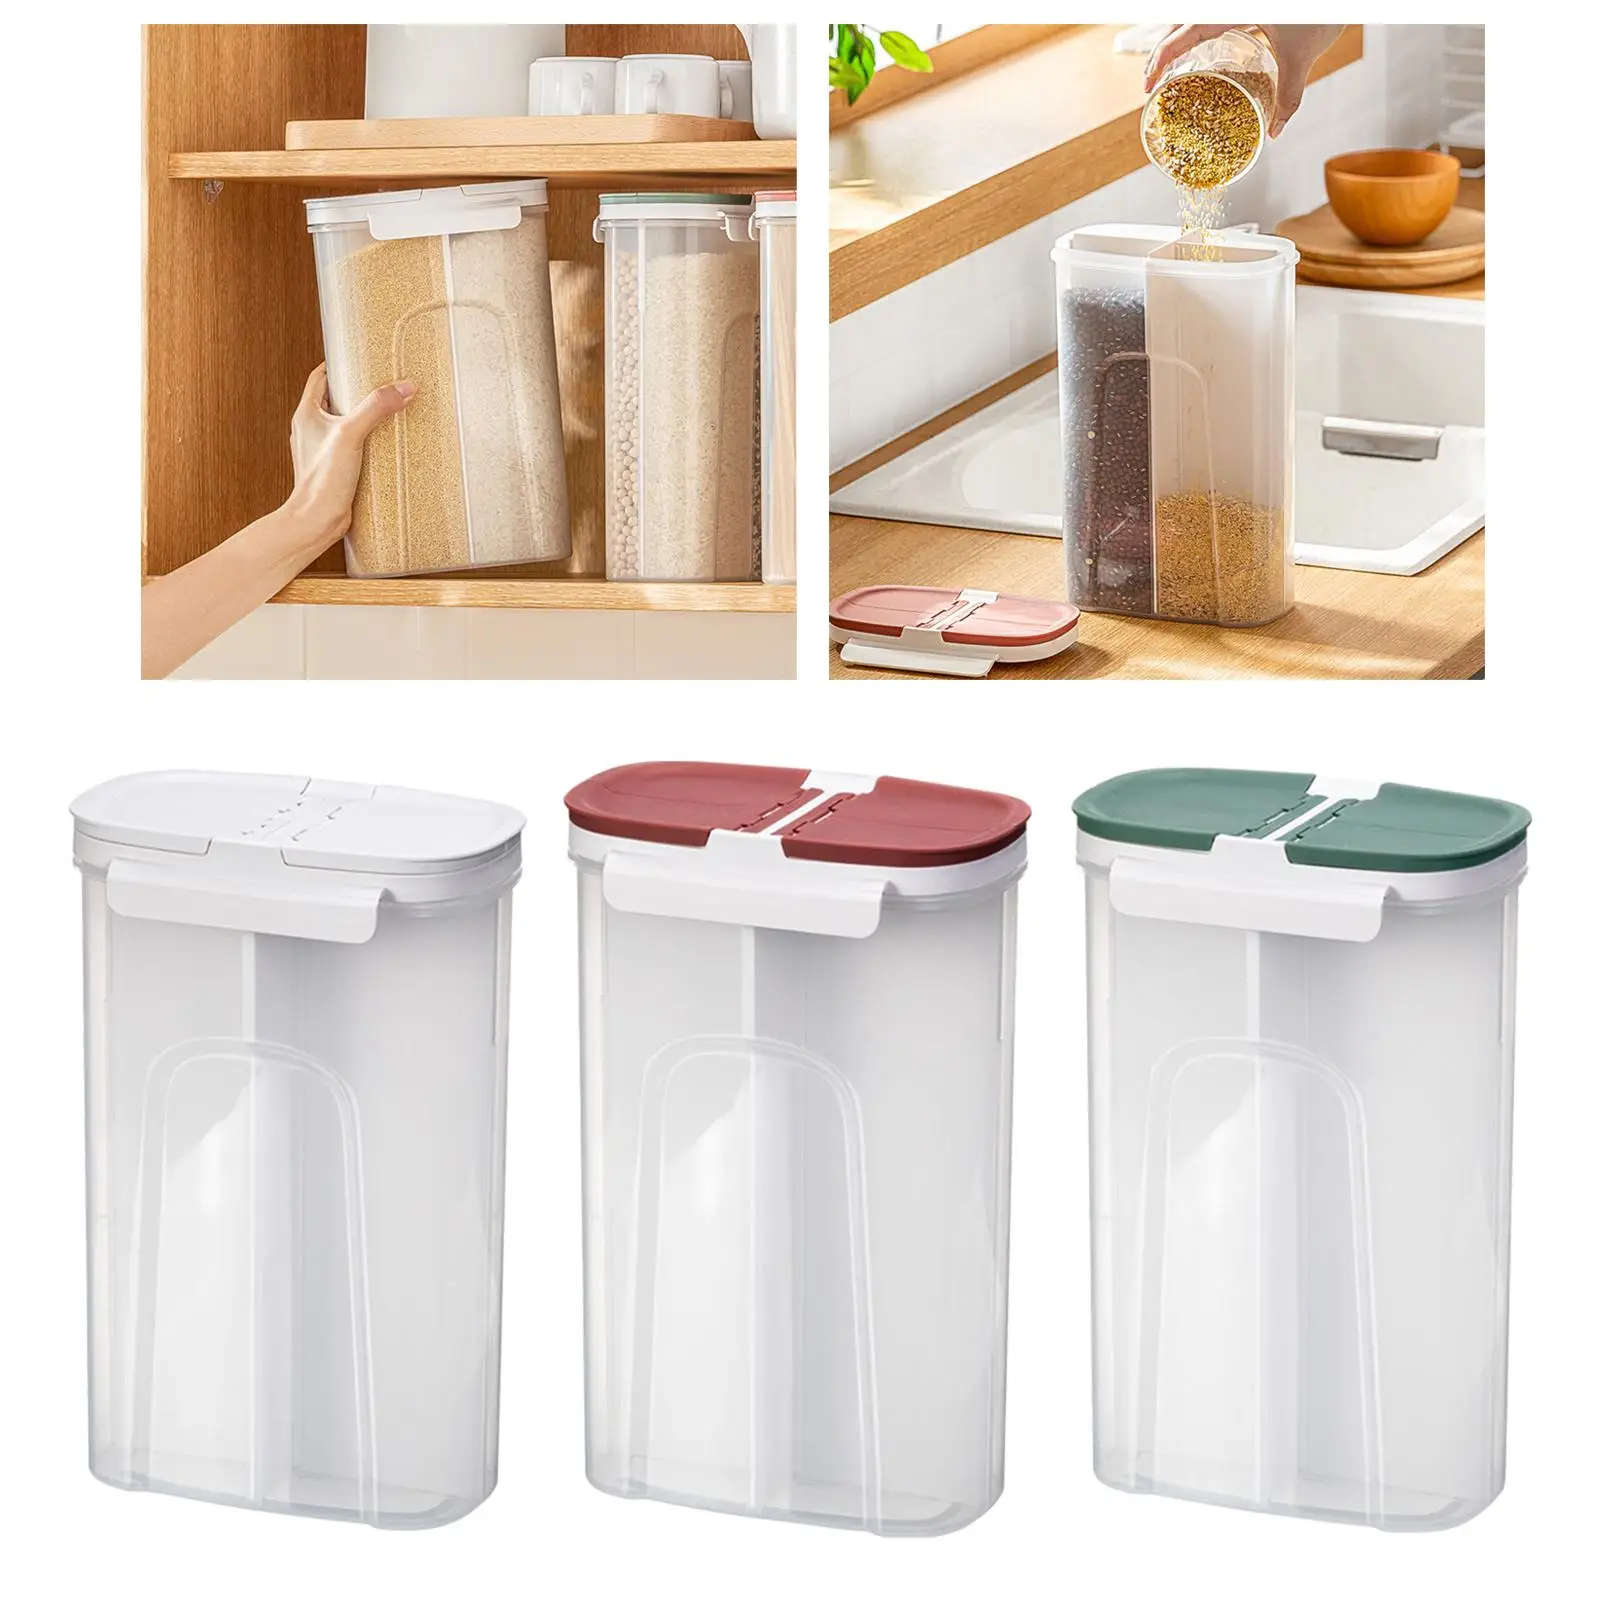   Food Jar Organizer,  Coffee Bean Oatmeal Oat Flour Cereal Cans with Sealed Lid & 4-Grid Divider